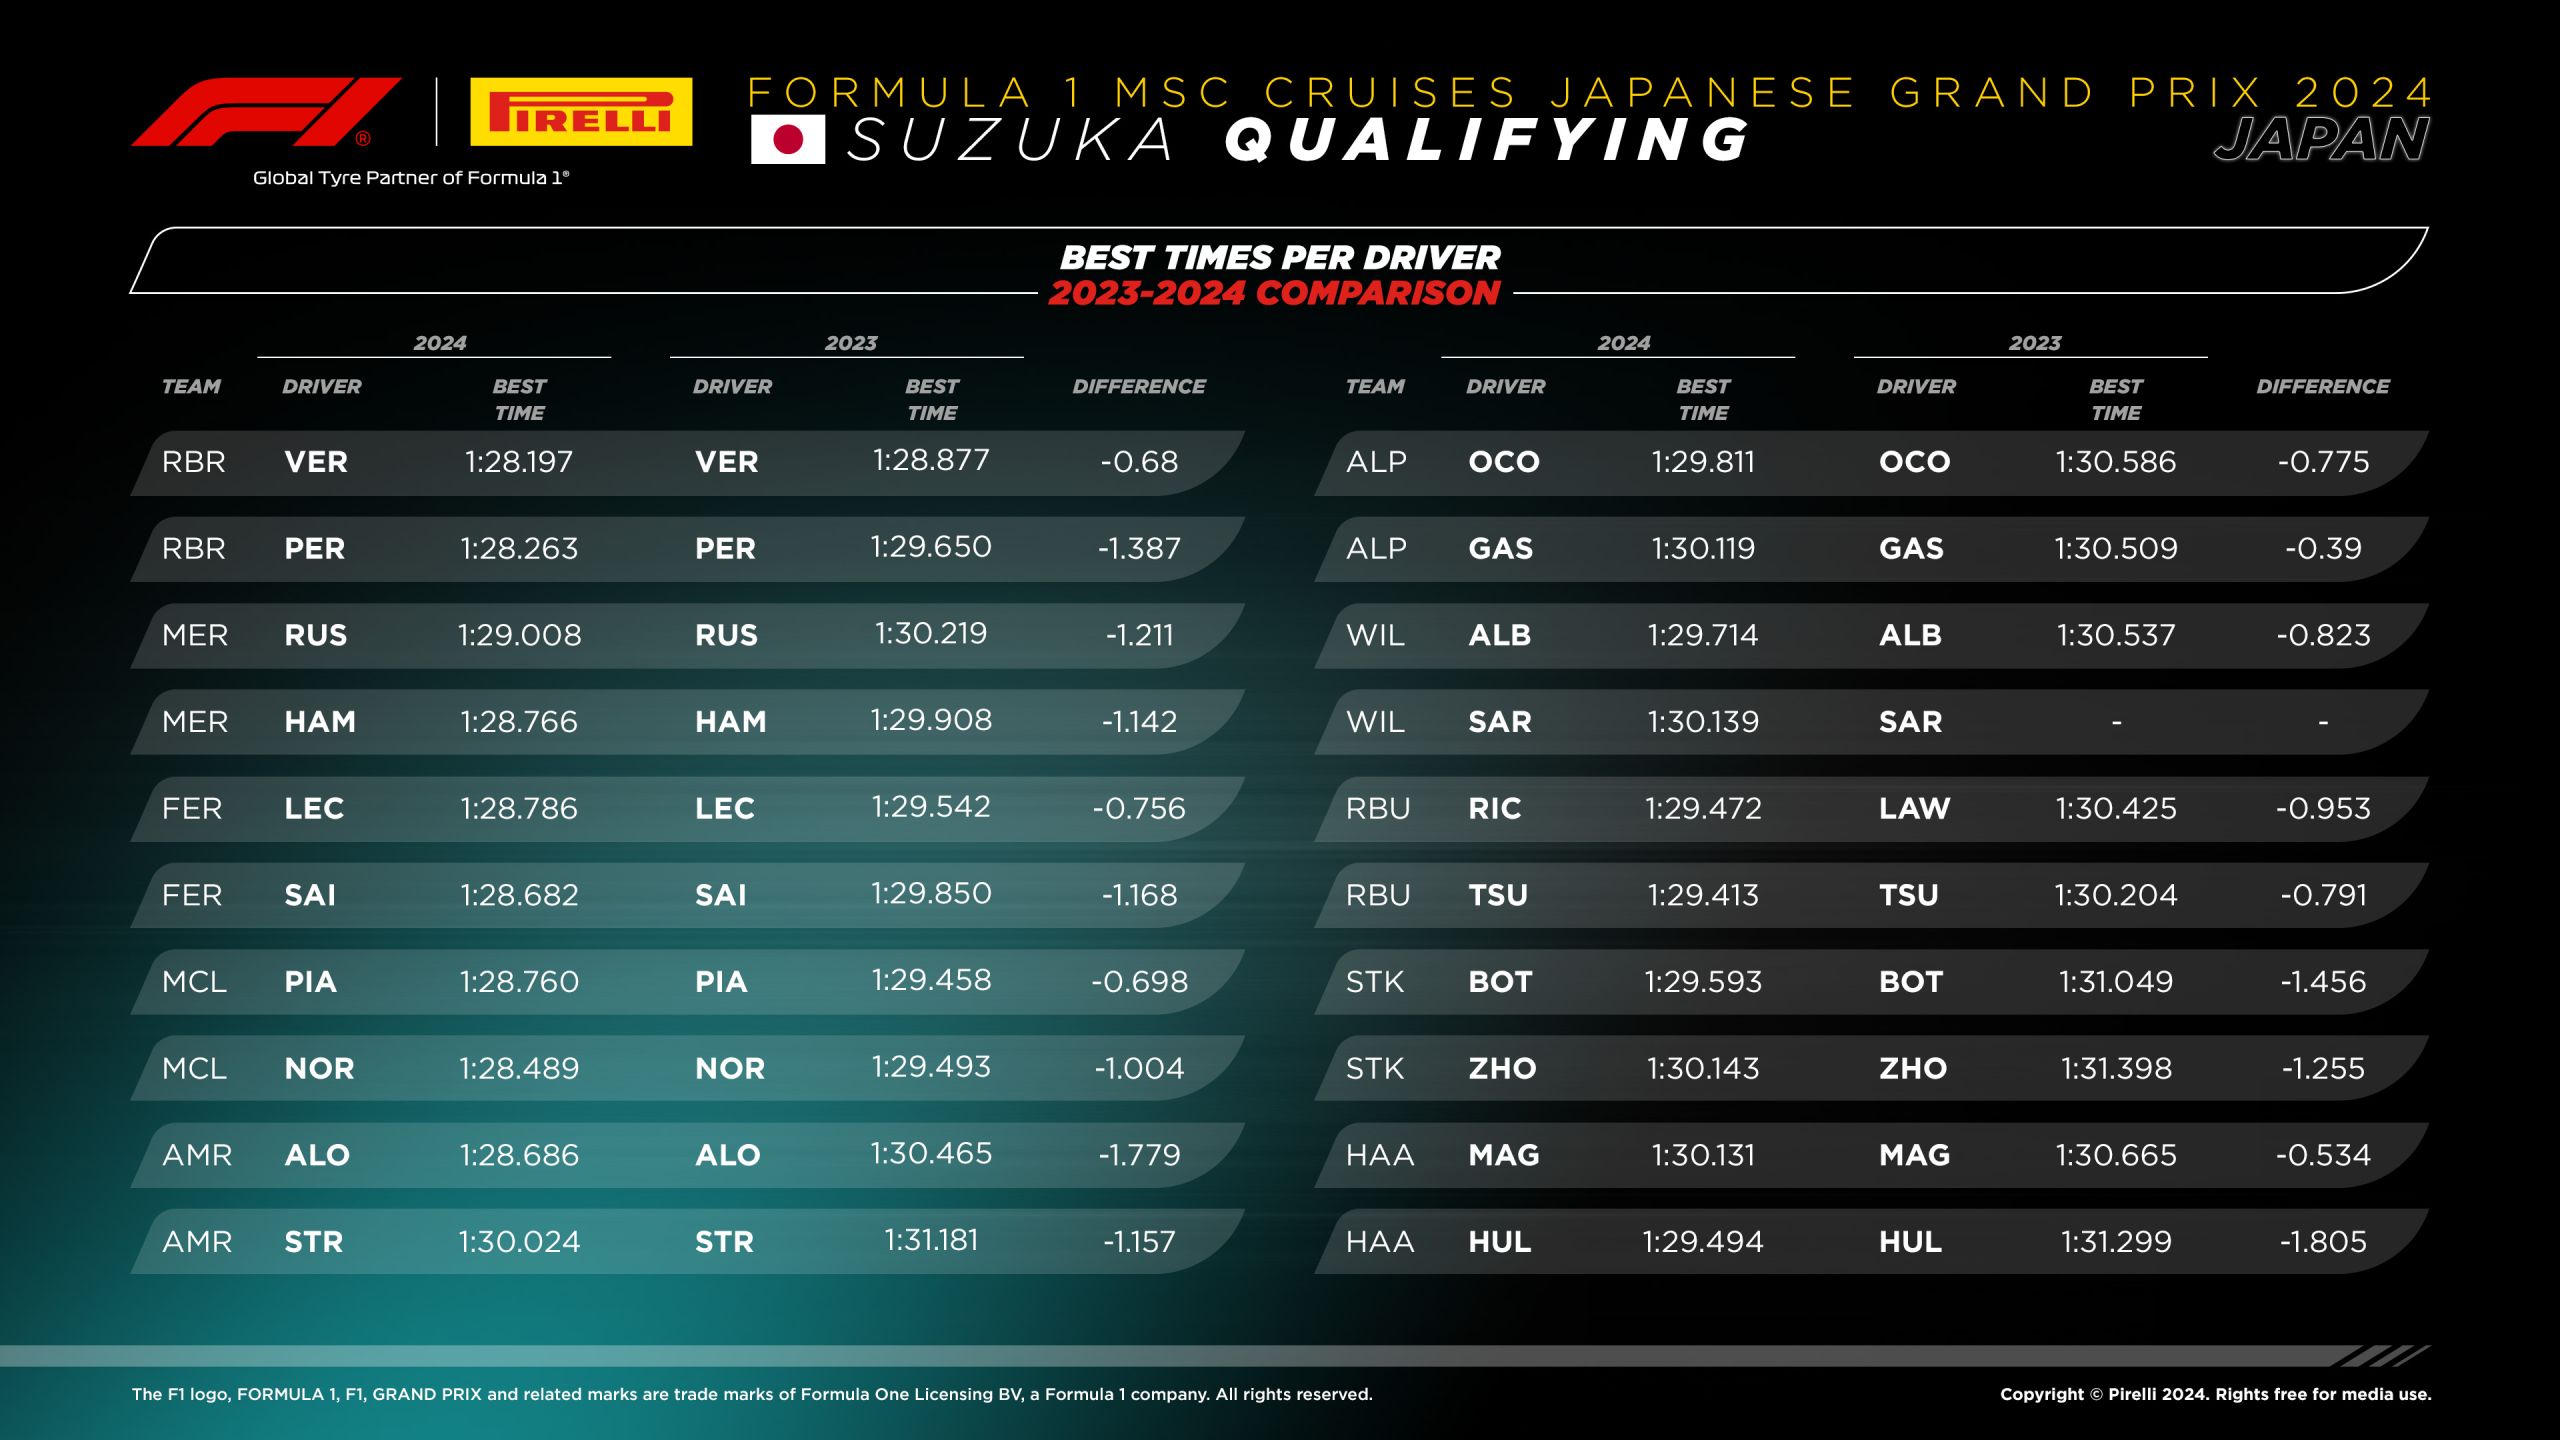 2024 Japanese Grand Prix: Qualifying Tyre Analysis - Best Times